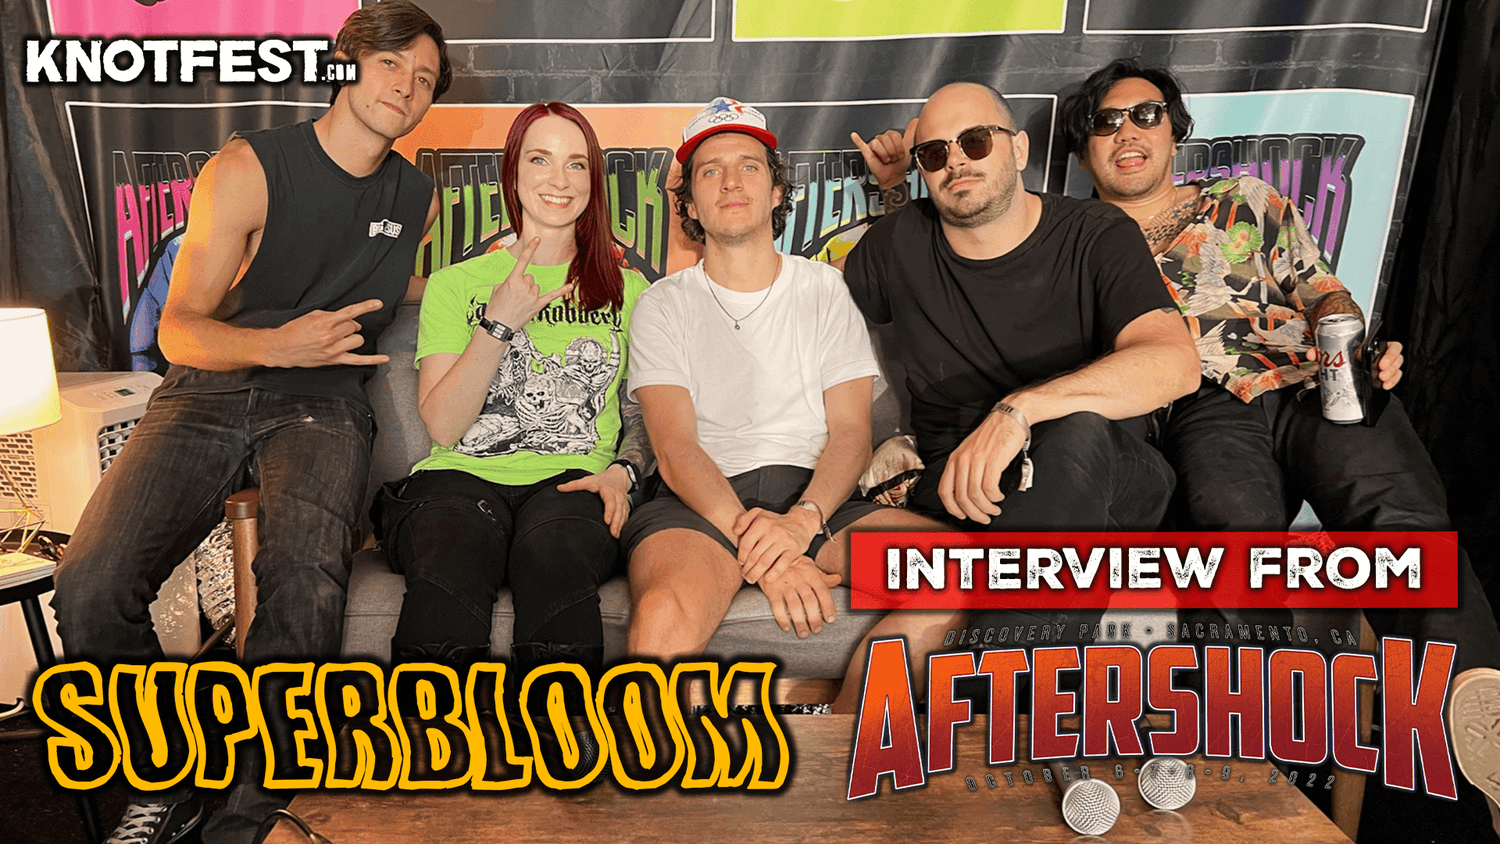 SUPERBLOOM on their highlights on the festival circuit from AFTERSHOCK